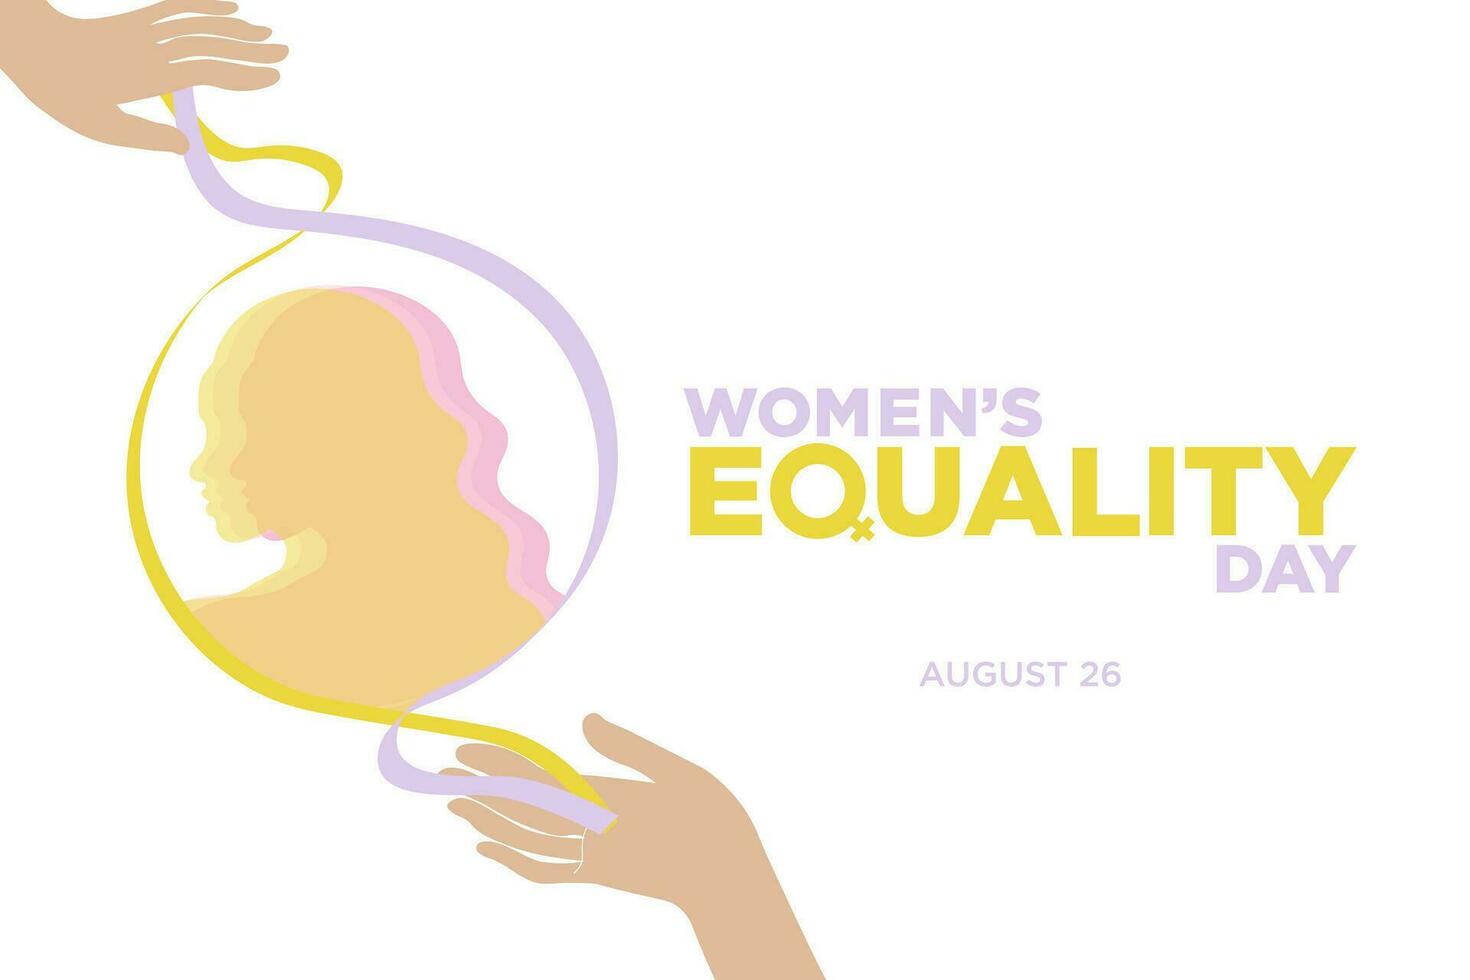 Women's Equality Day Banner. Human hand with intertwined ribbon framing colorful silhouettes of women. Editable Vector Illustration. EPS 10. Celebrated on August 26.